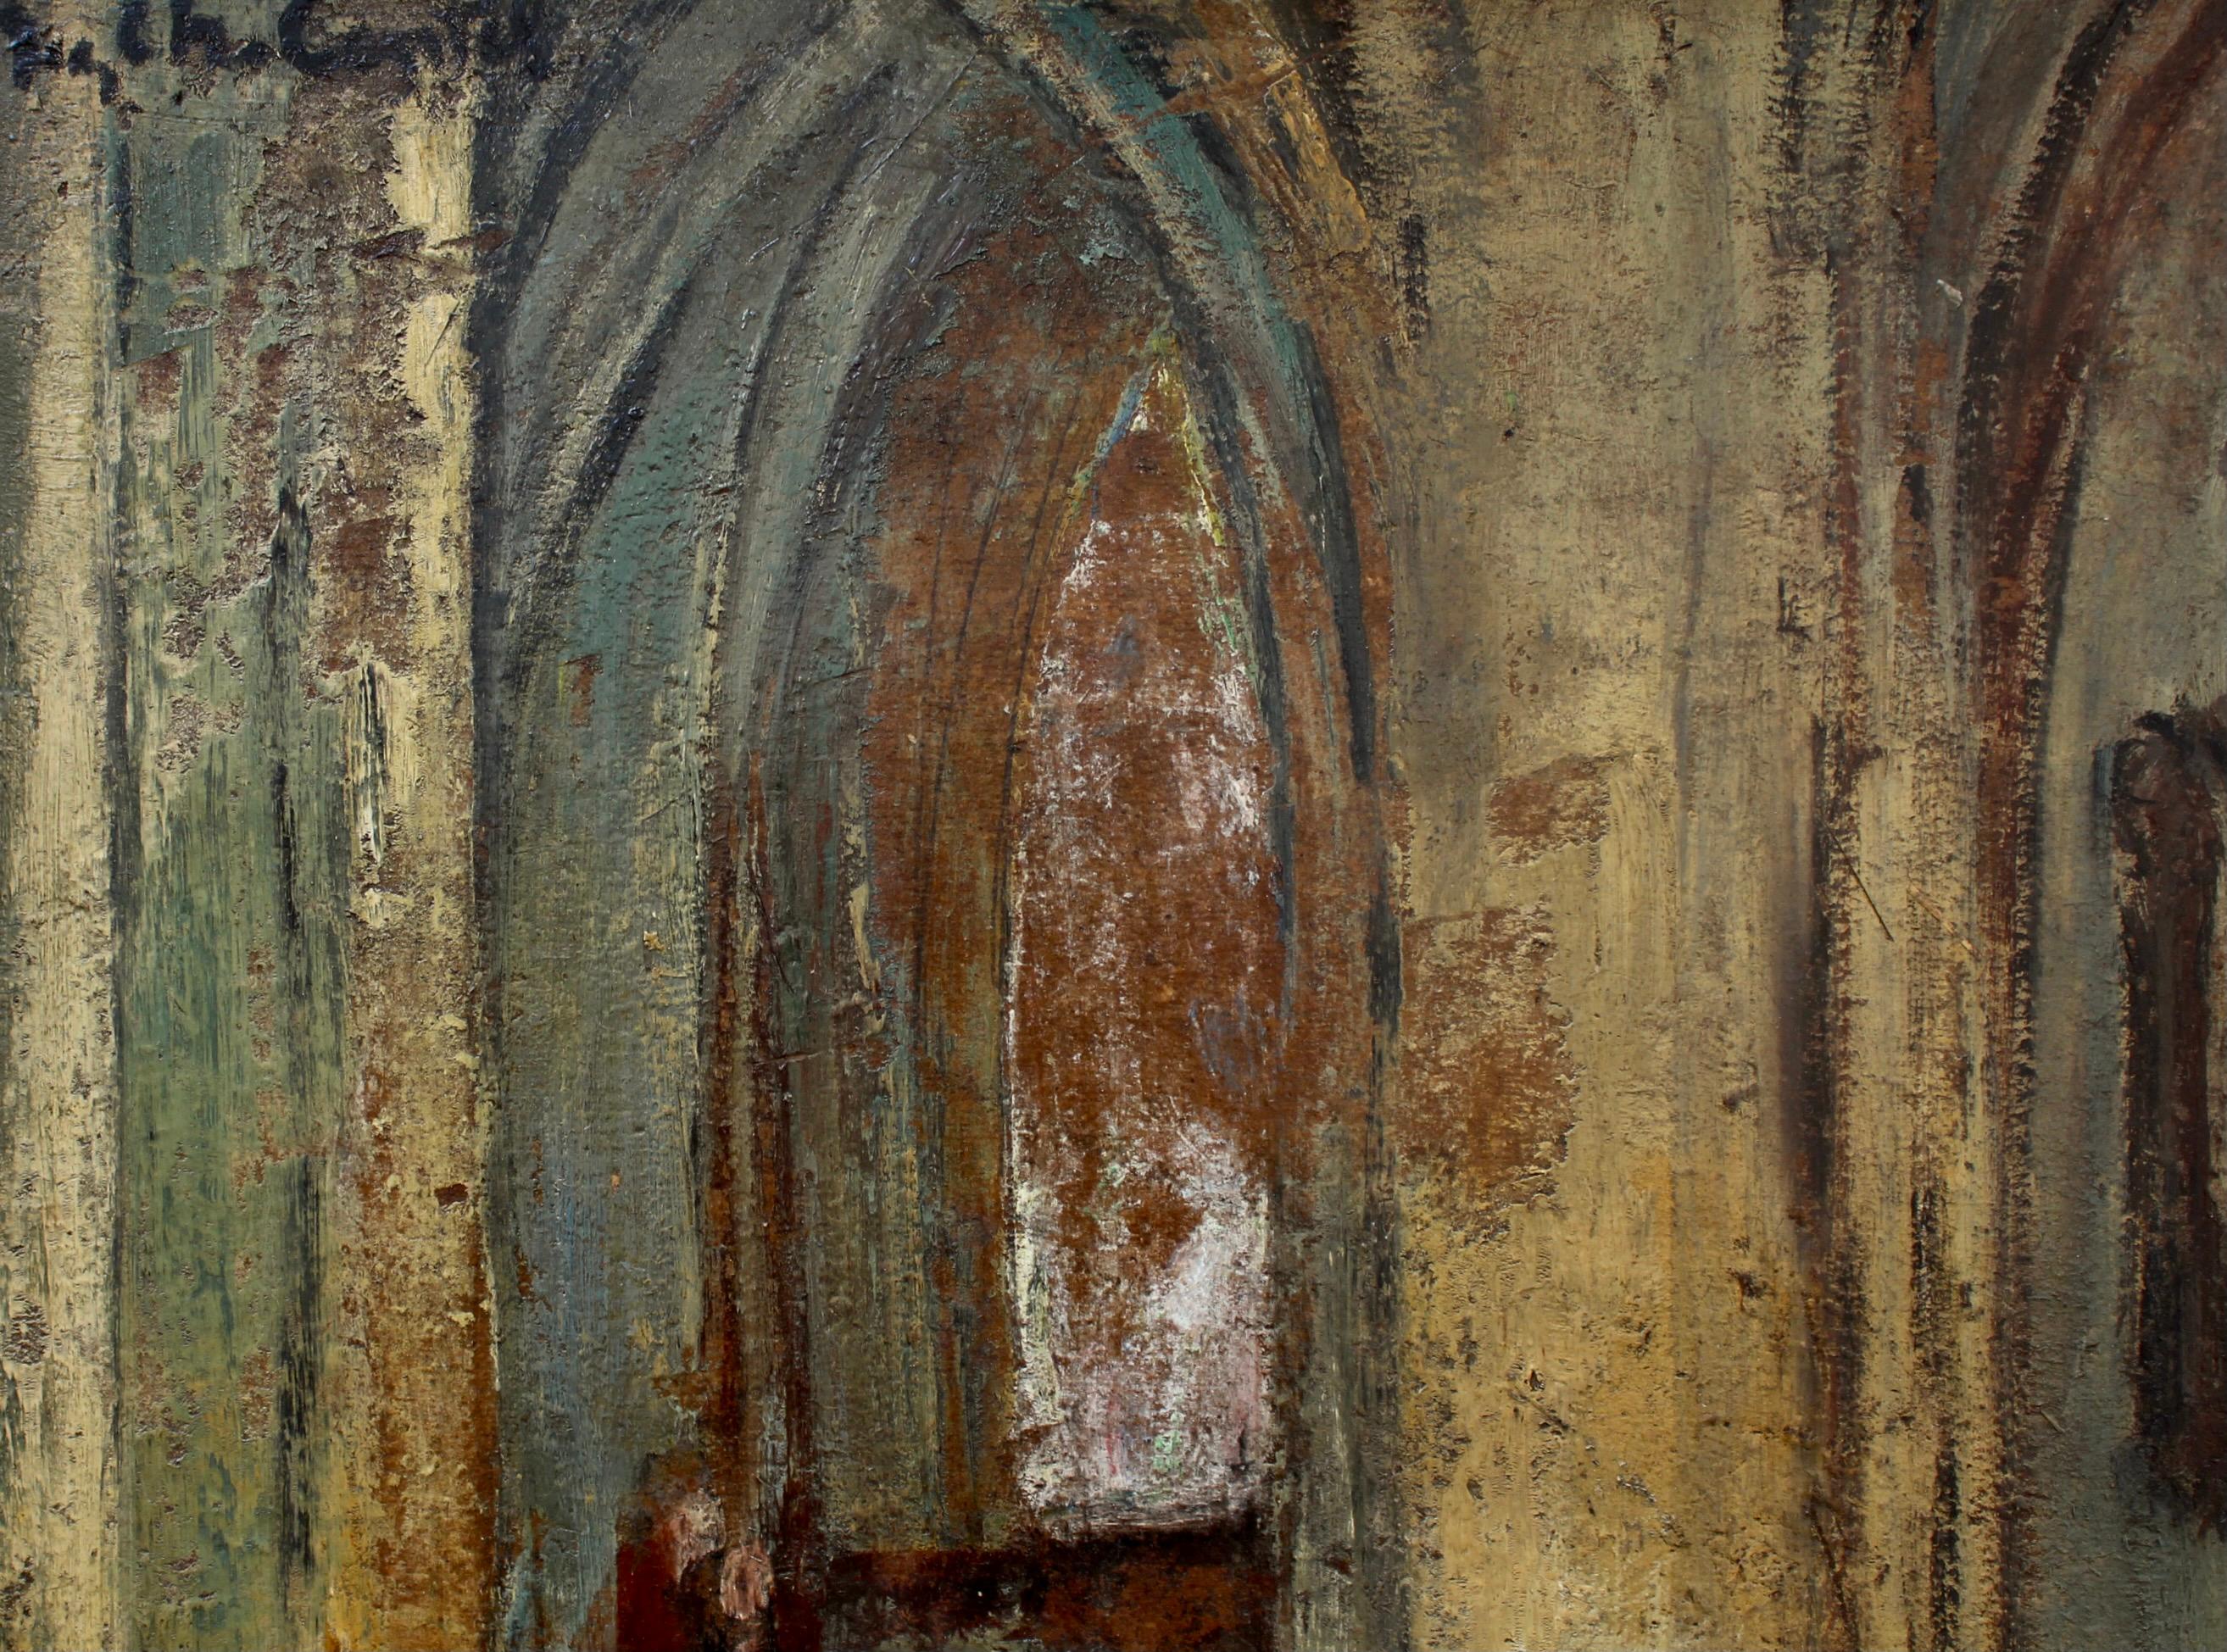 'Church Interior', oil on board, by Jean-Charles Contel (circa 1920s). The artist has exquisitely captured the church's aura and character in his depiction of the cold stone floors, the ancient columns and arches as well as the railings of this